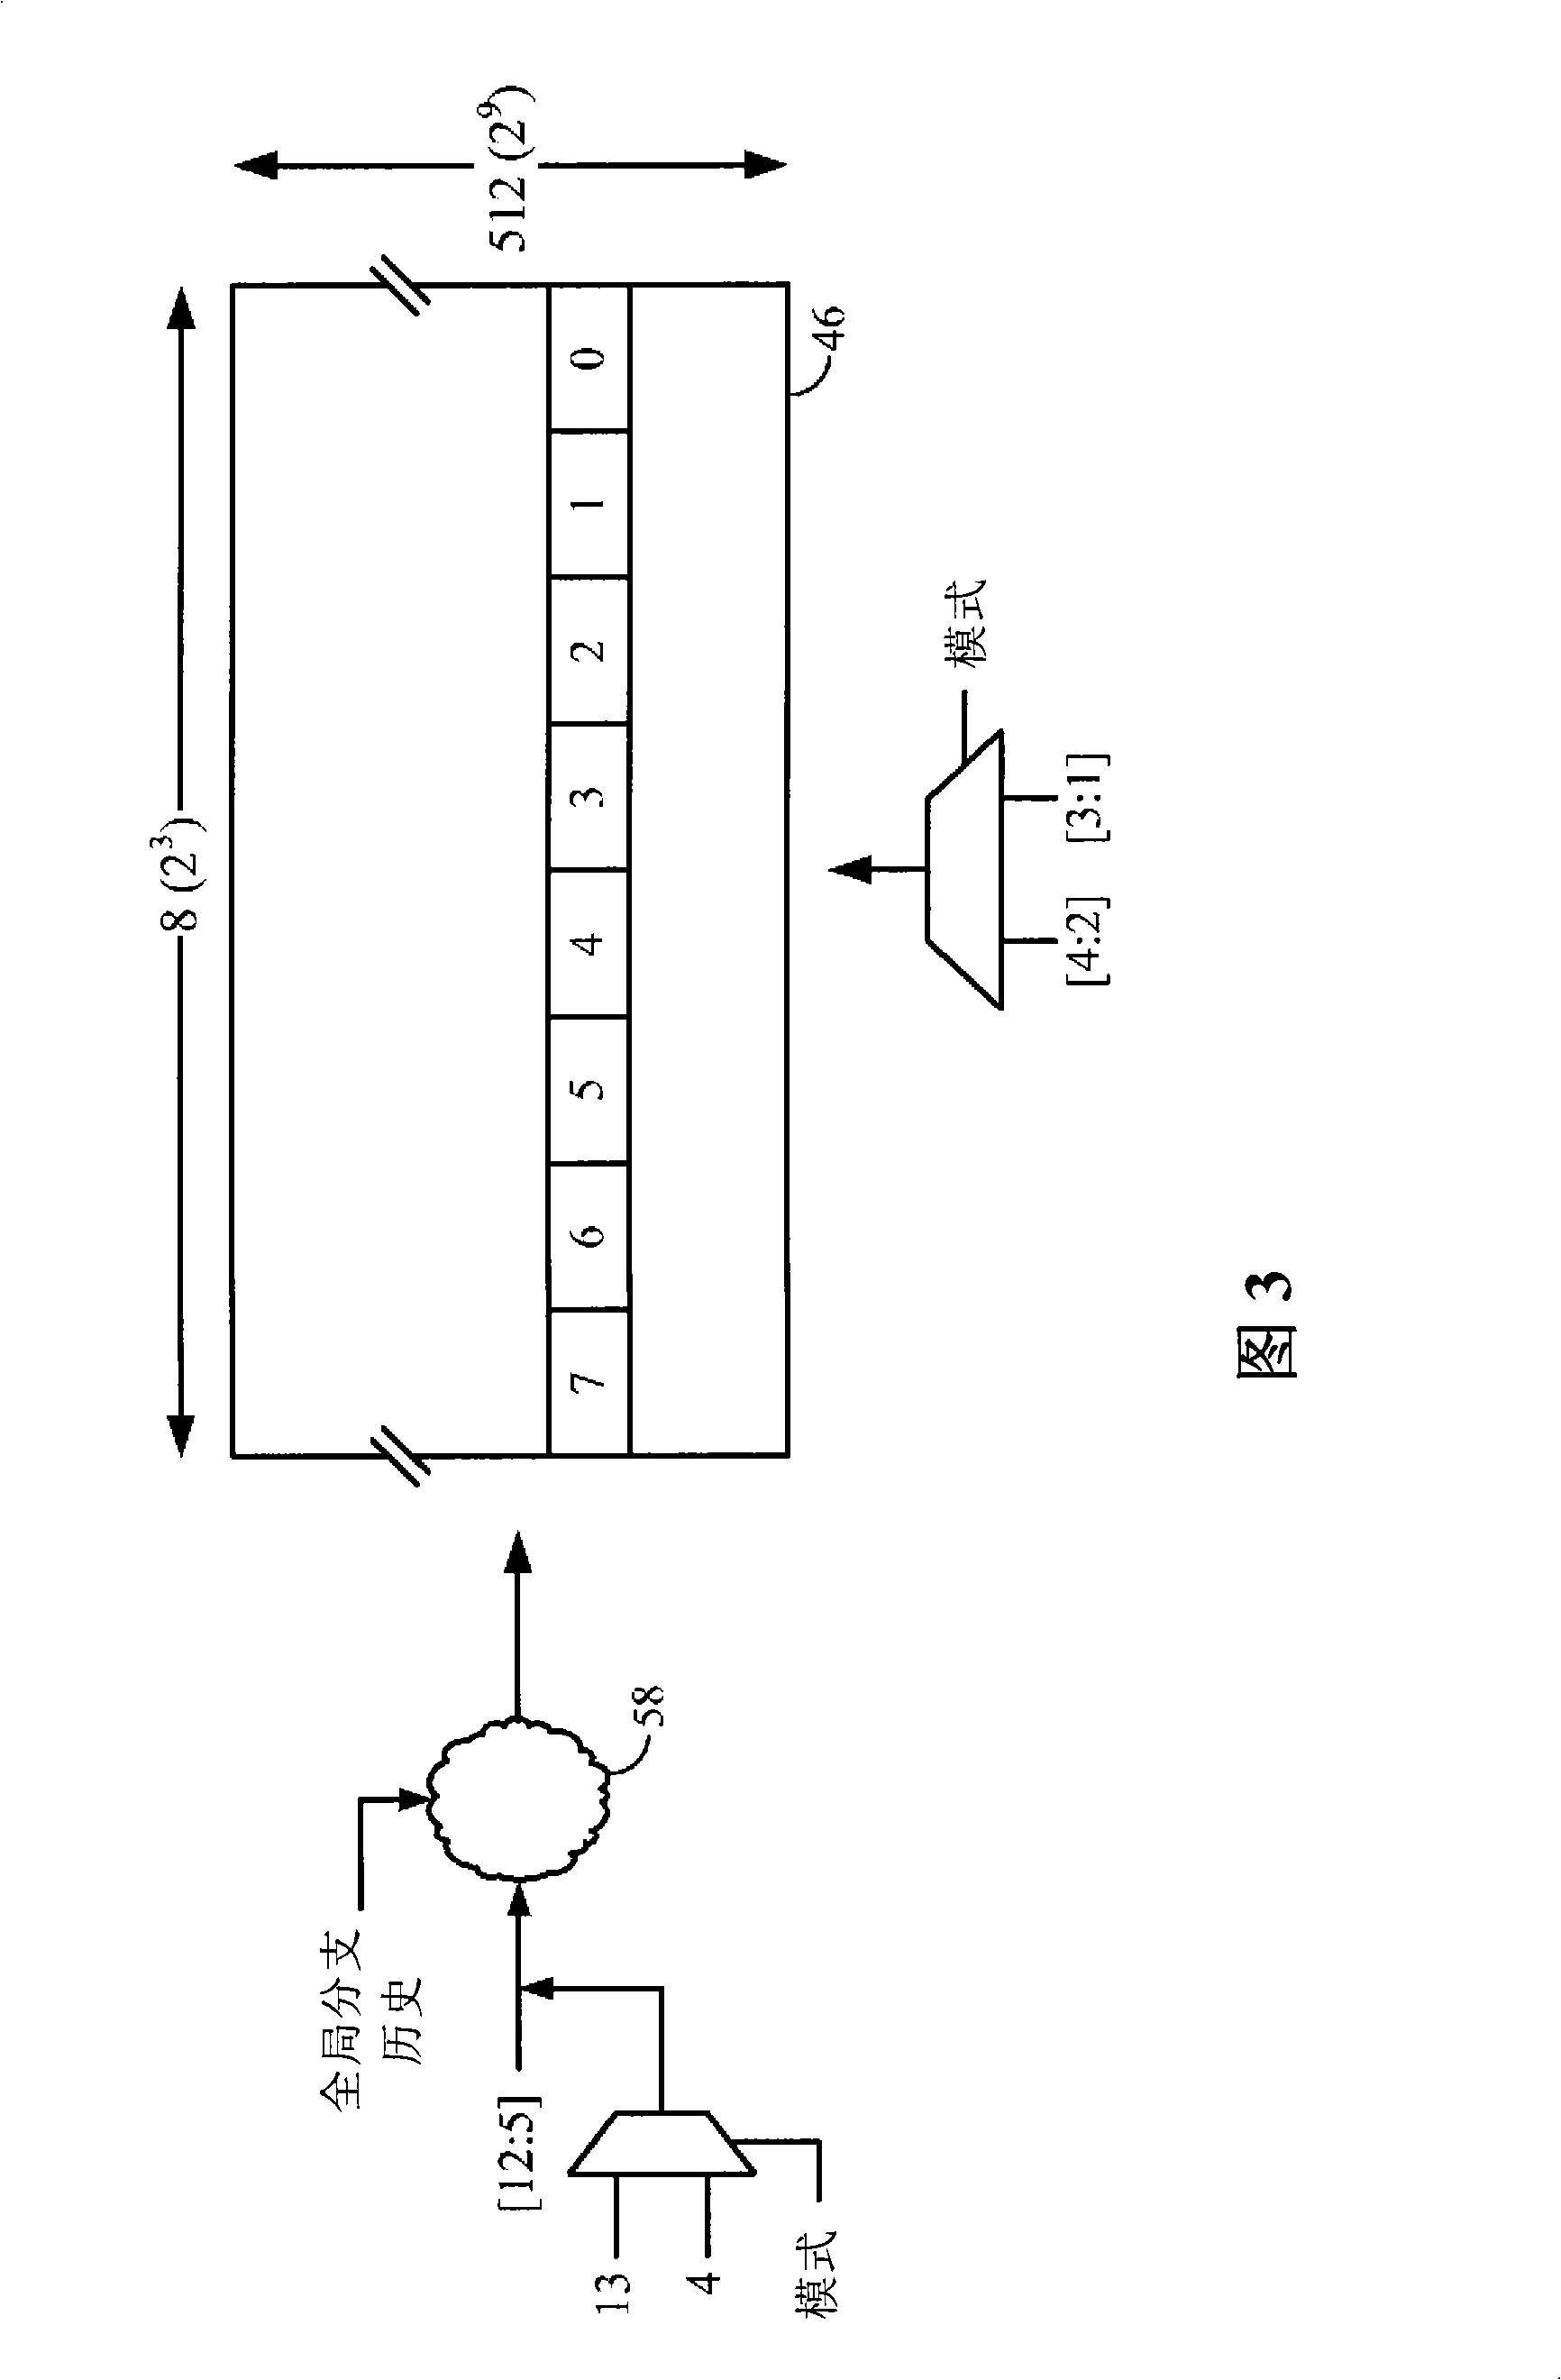 Effective use of a bht in processor having variable length instruction set execution modes